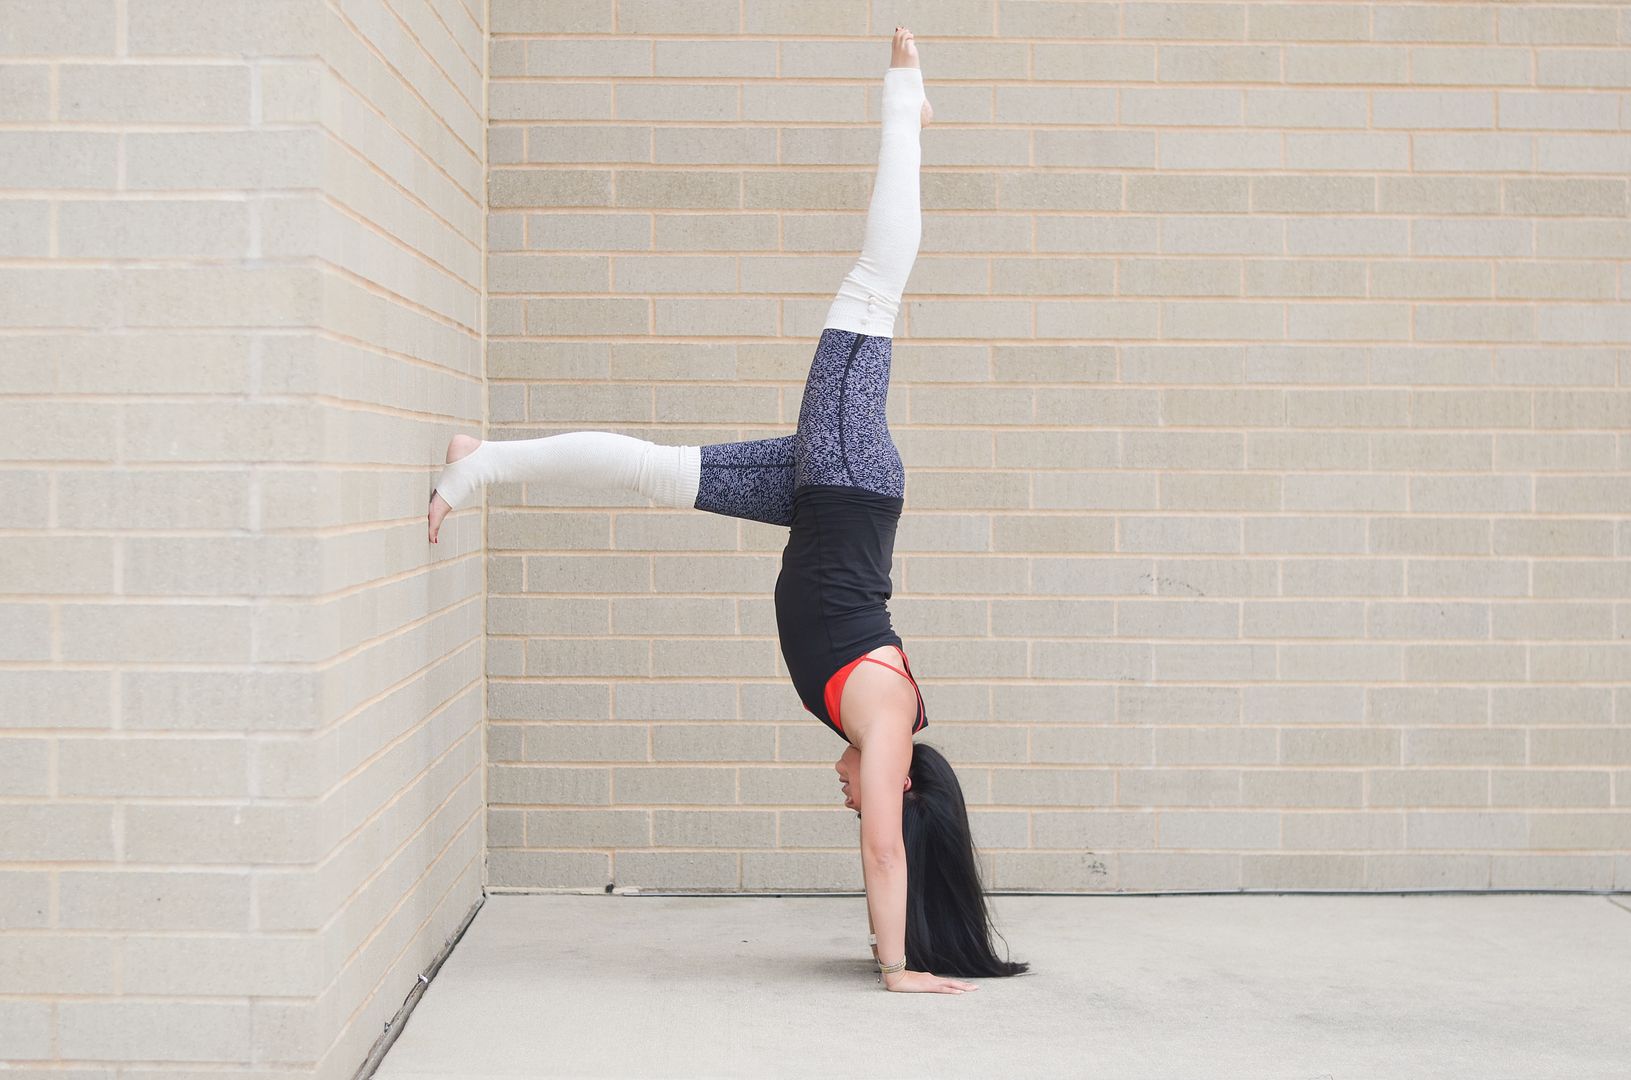 Handstand with wall assist